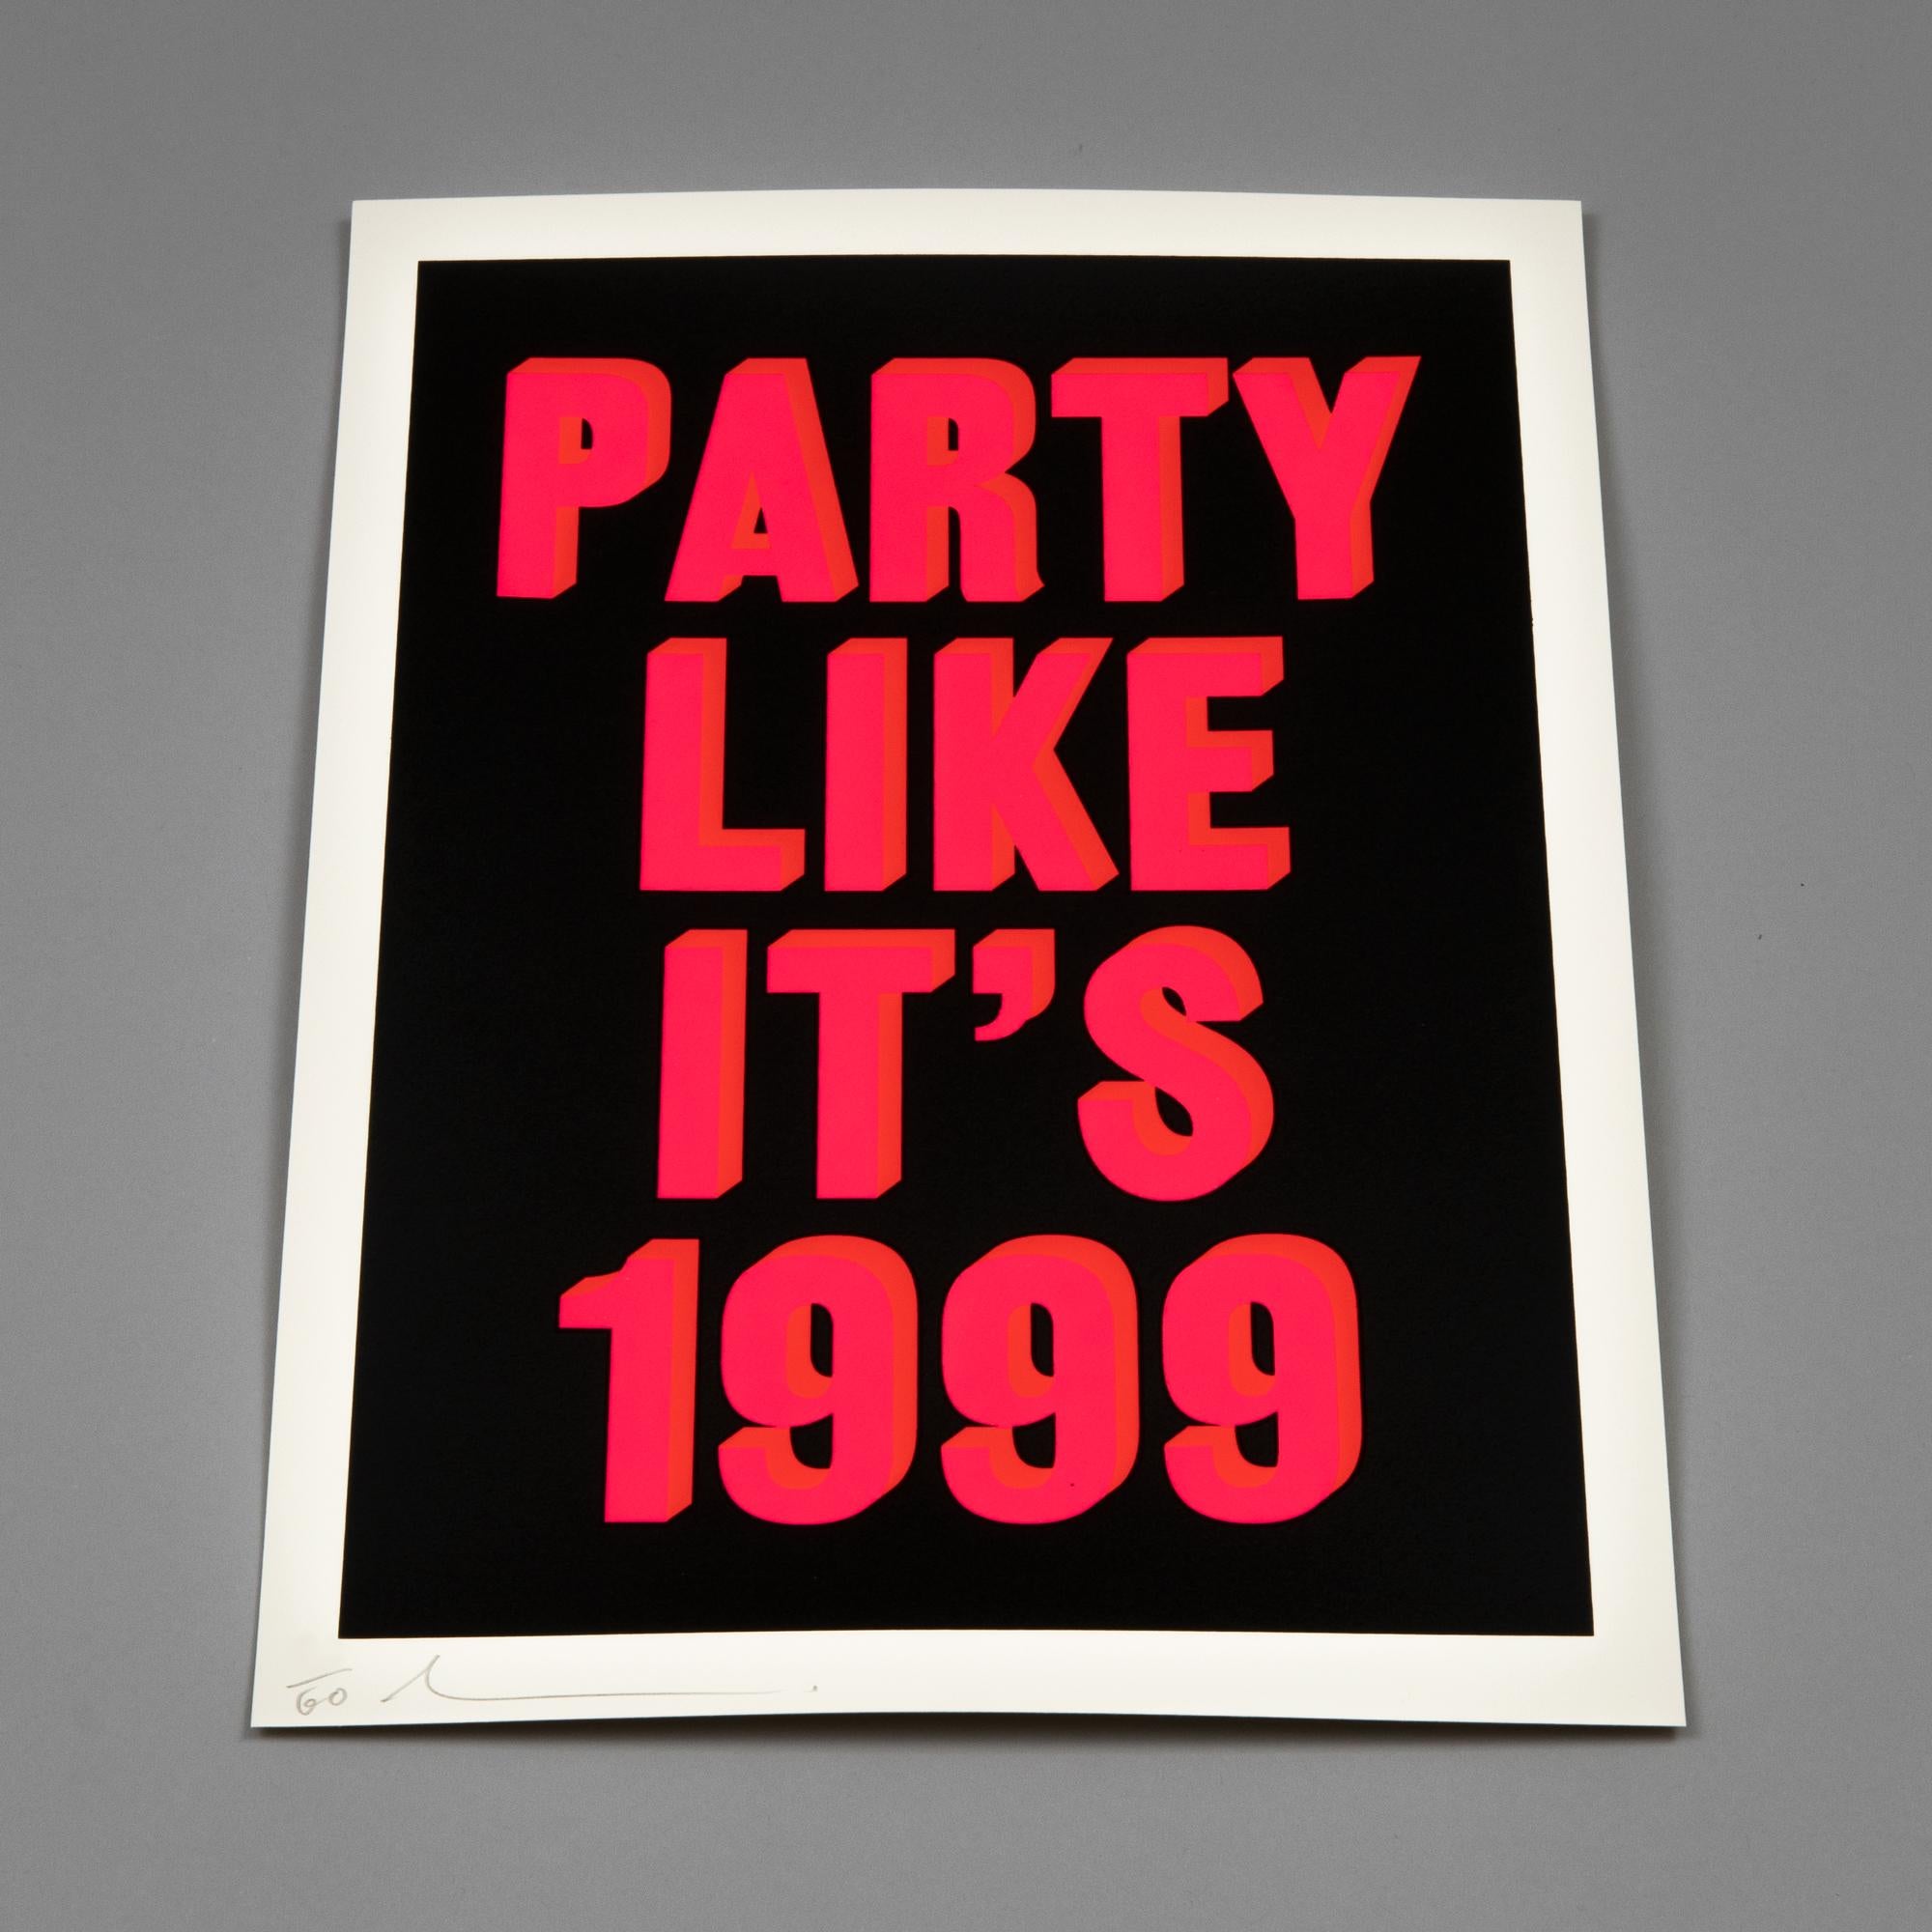 Dave Buonaguidi, Party Like It's 1999: Signed Screen Print, Contemporary Pop Art 1